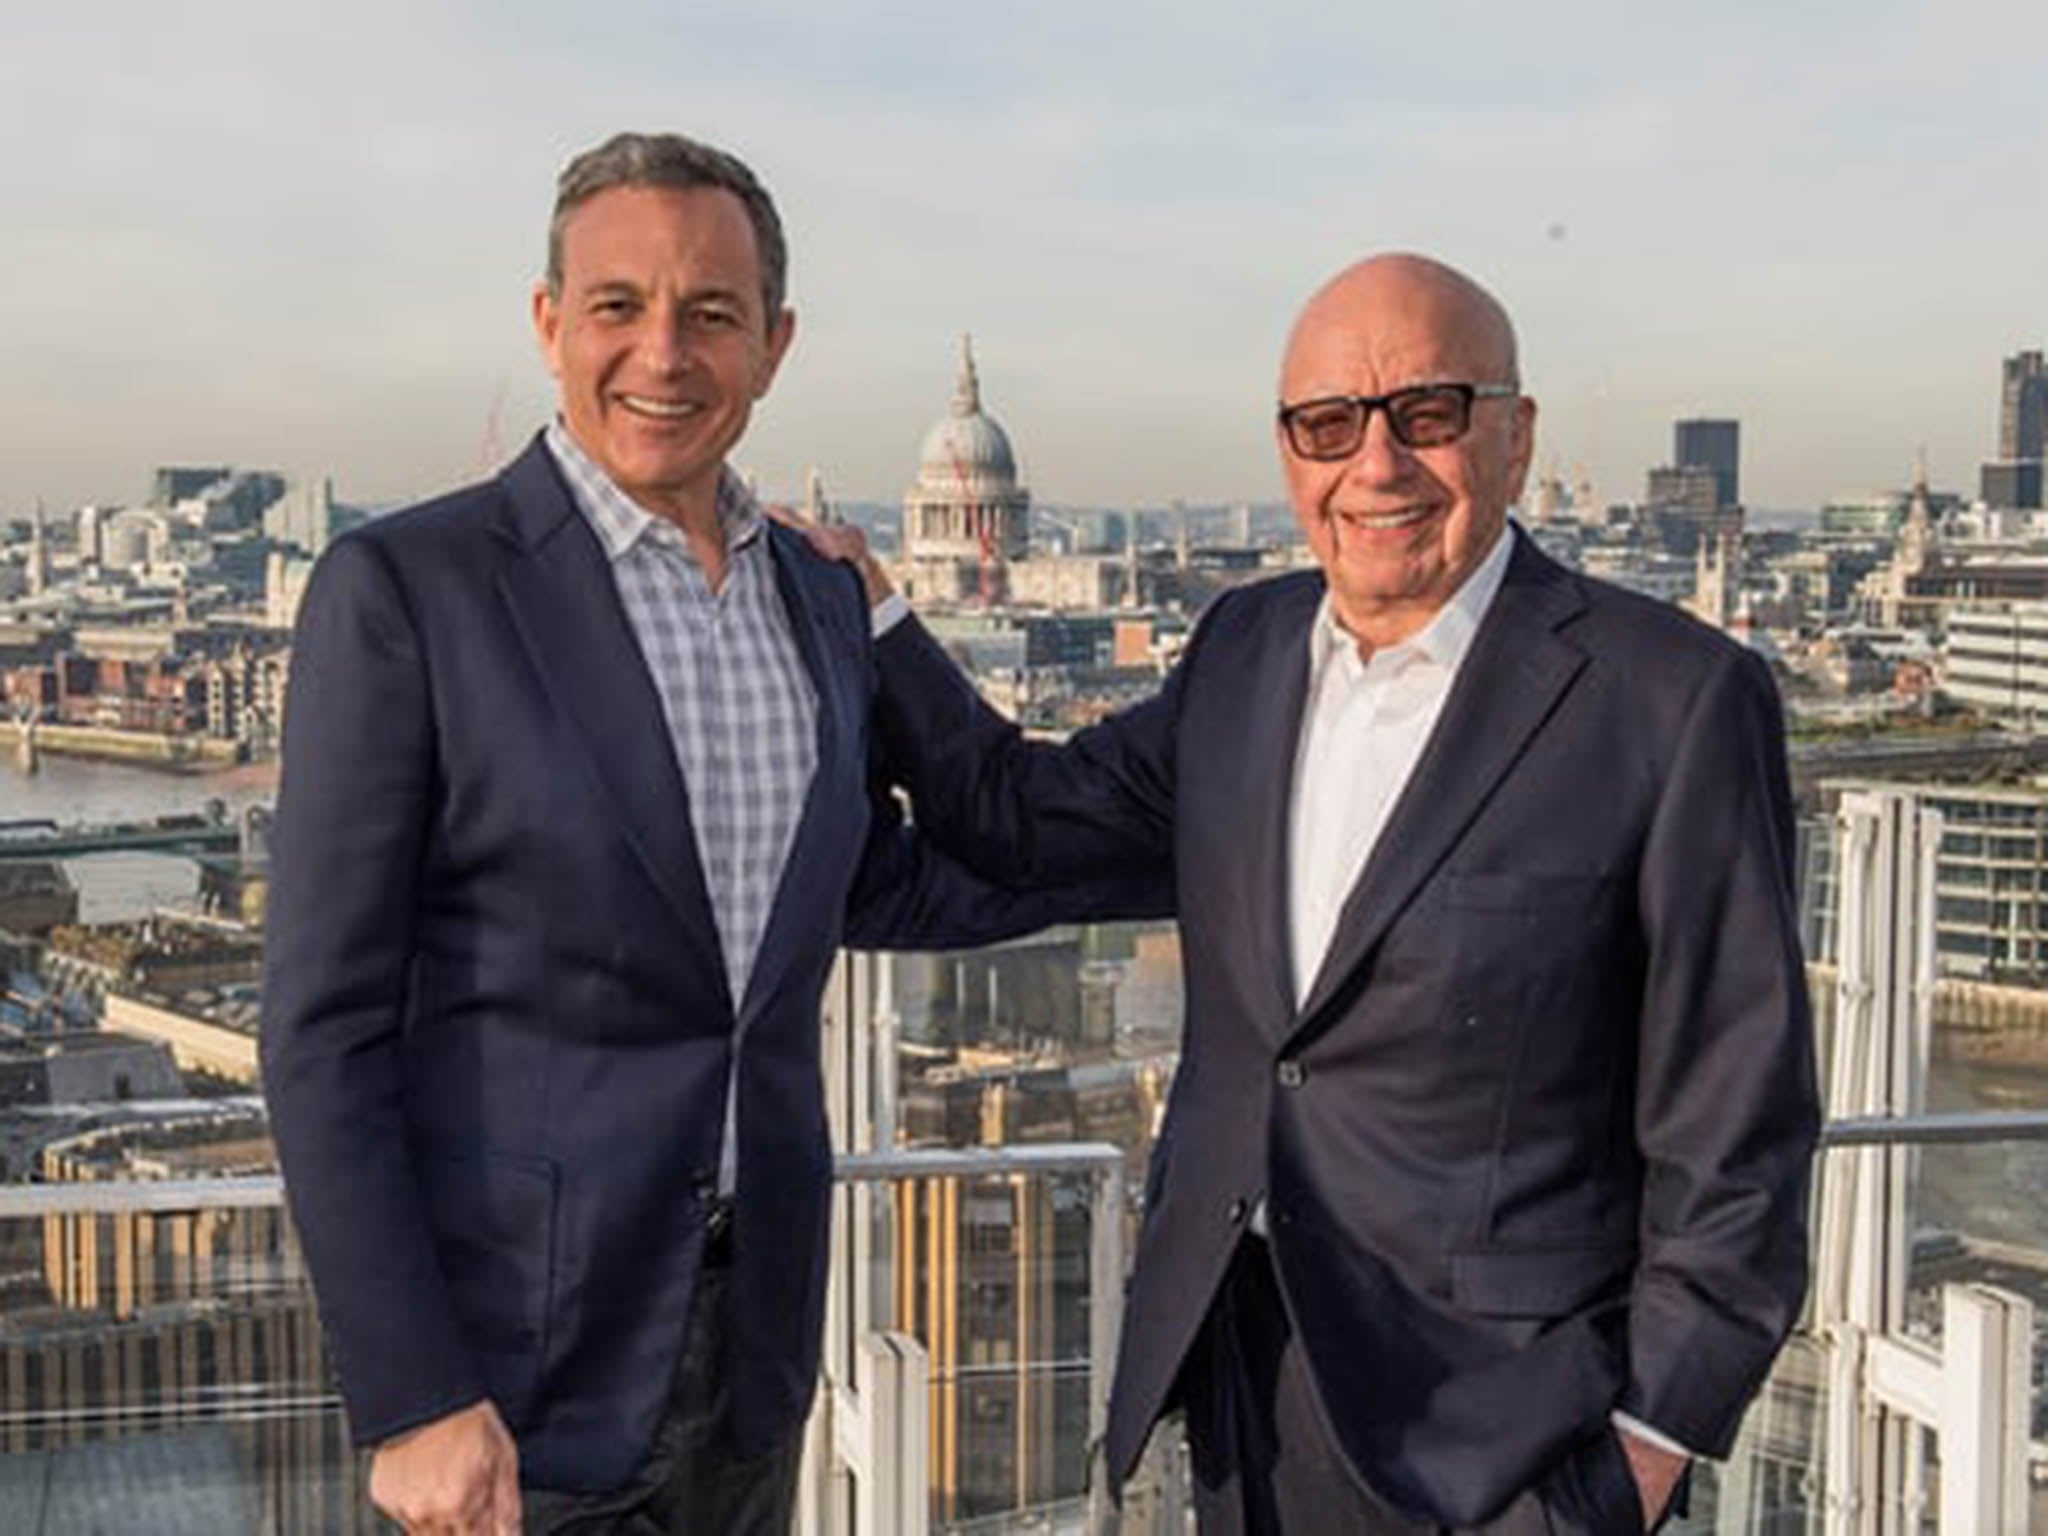 'I’m convinced that this combination, under Bob Iger’s leadership, will be one of the greatest companies in the world,' Murdoch said